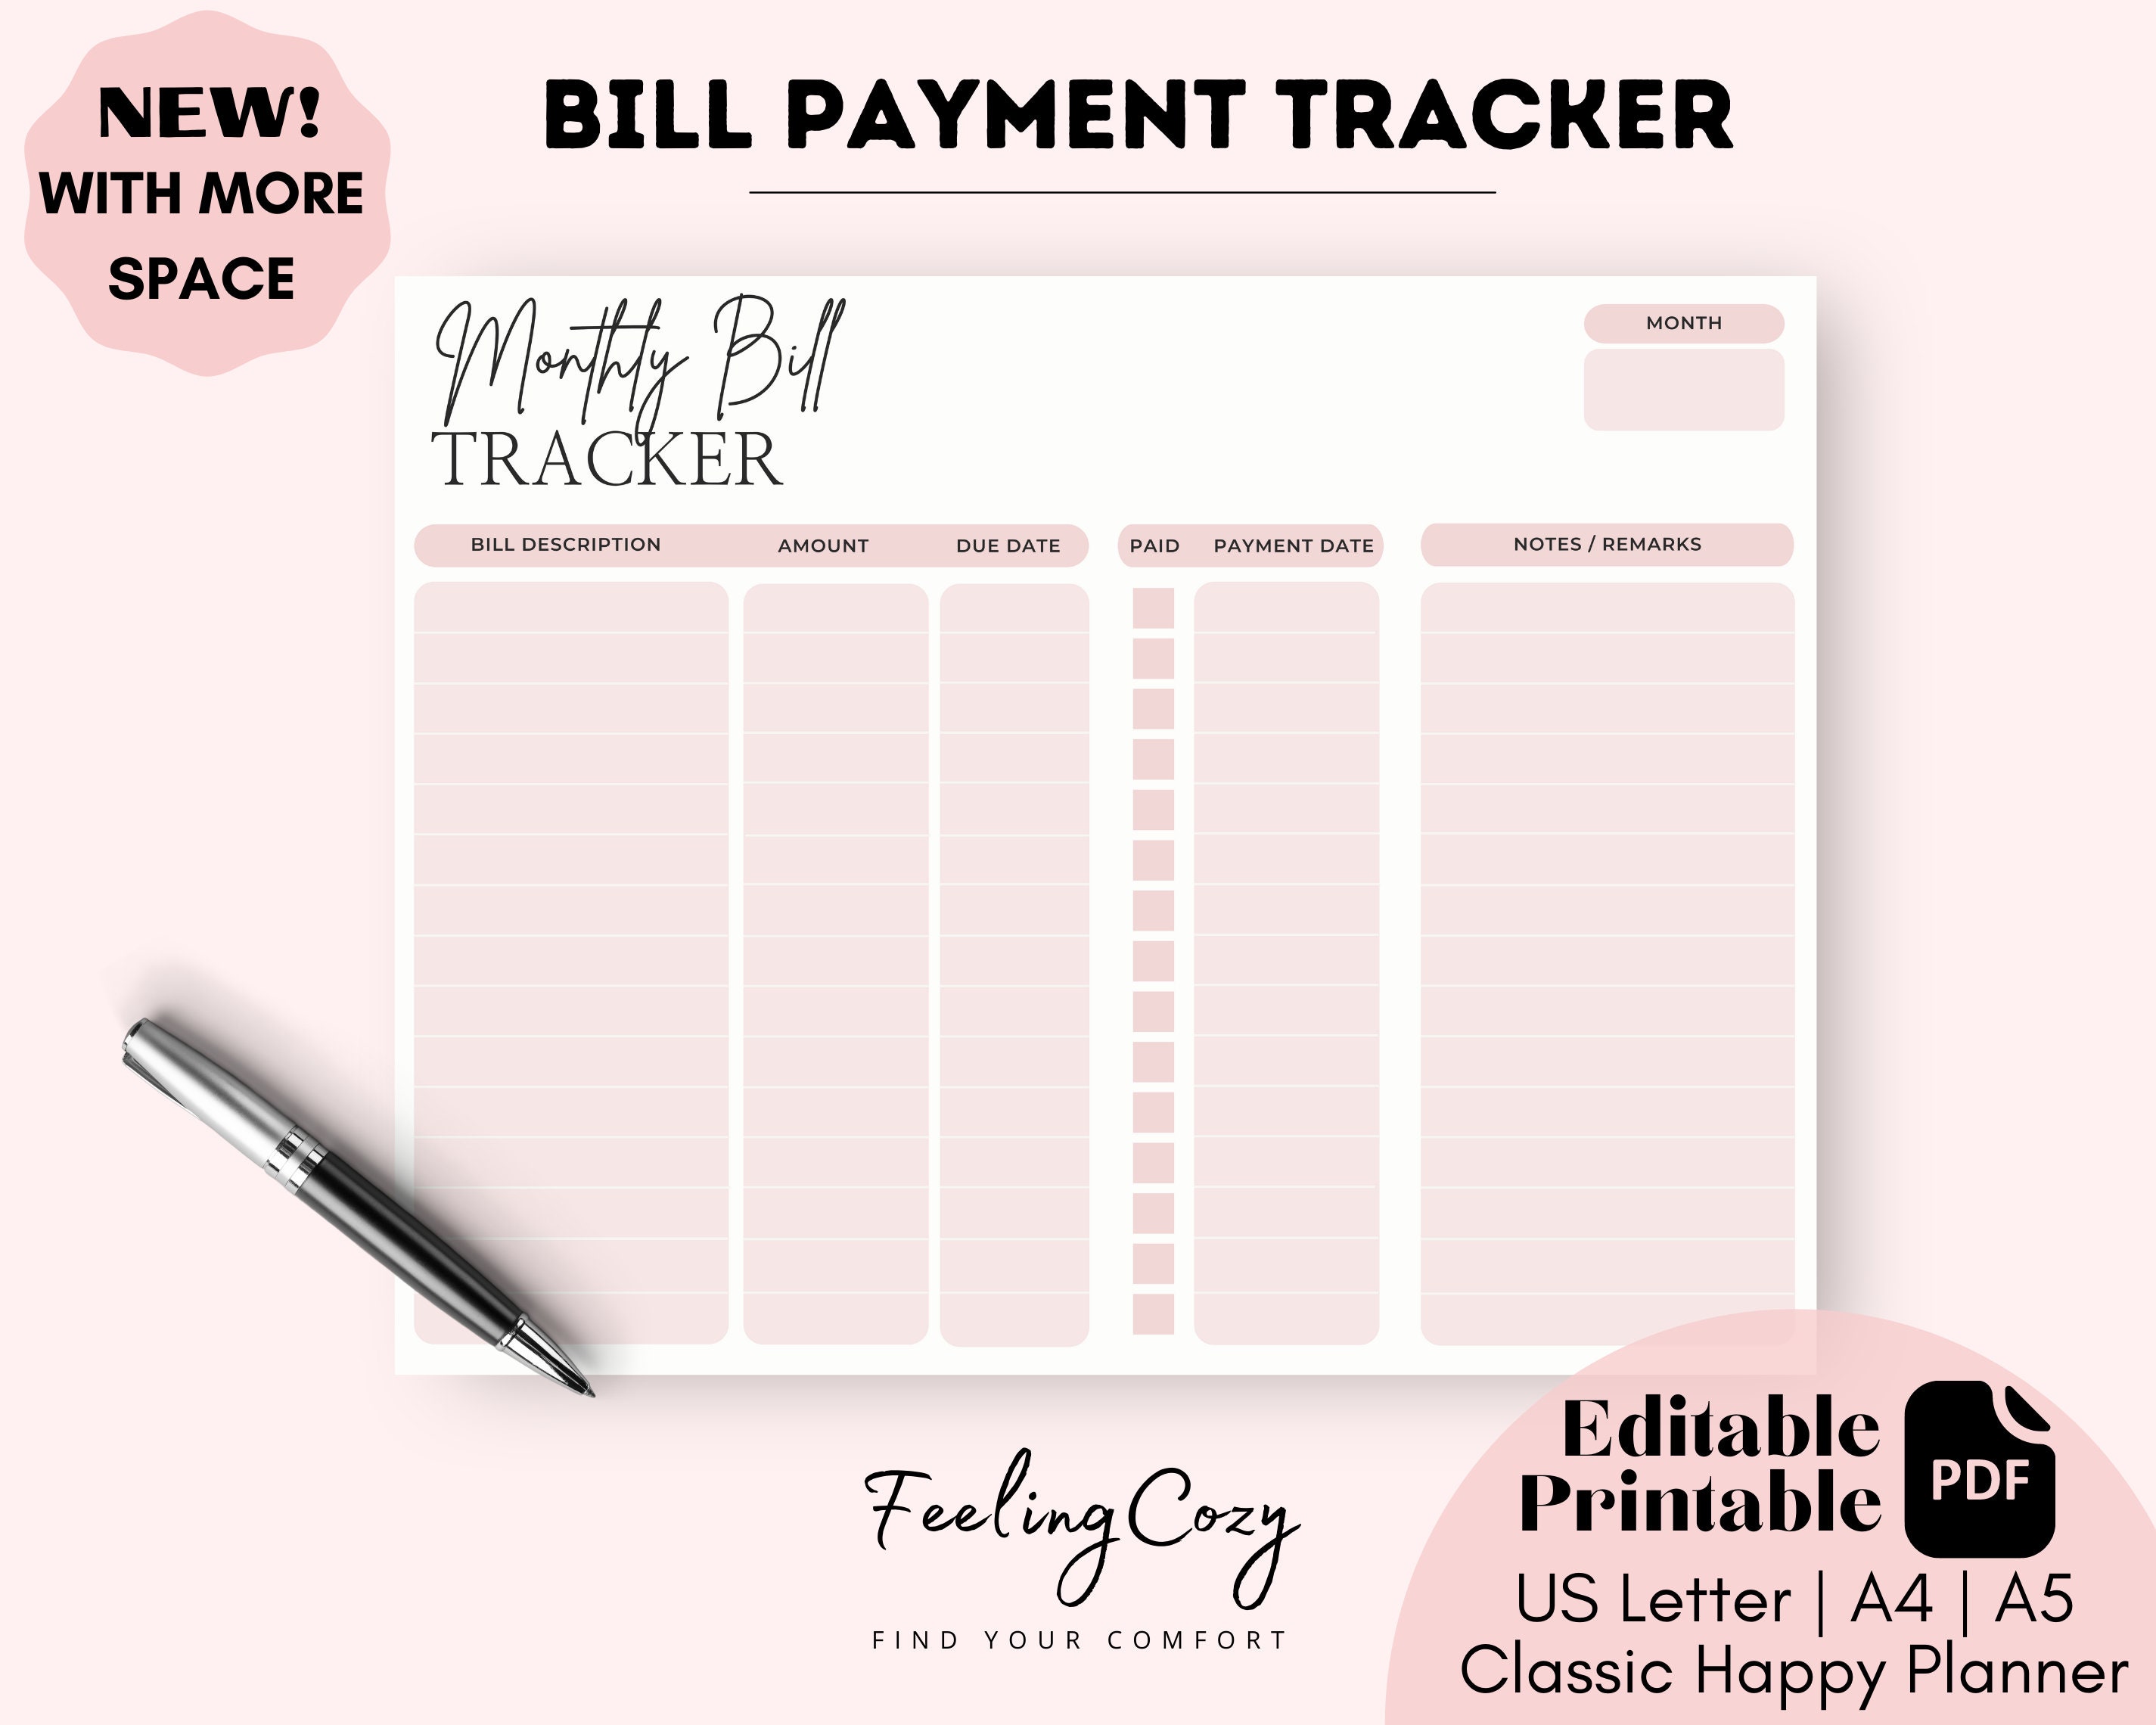 7″ x 8.5″ Home Finance & Bill Payment Organizer PLANBERRY Budget Planner & Monthly Bill Organizer with Pockets Budgeting Book with Income & Expense Tracker Tropical Night Hardcover 